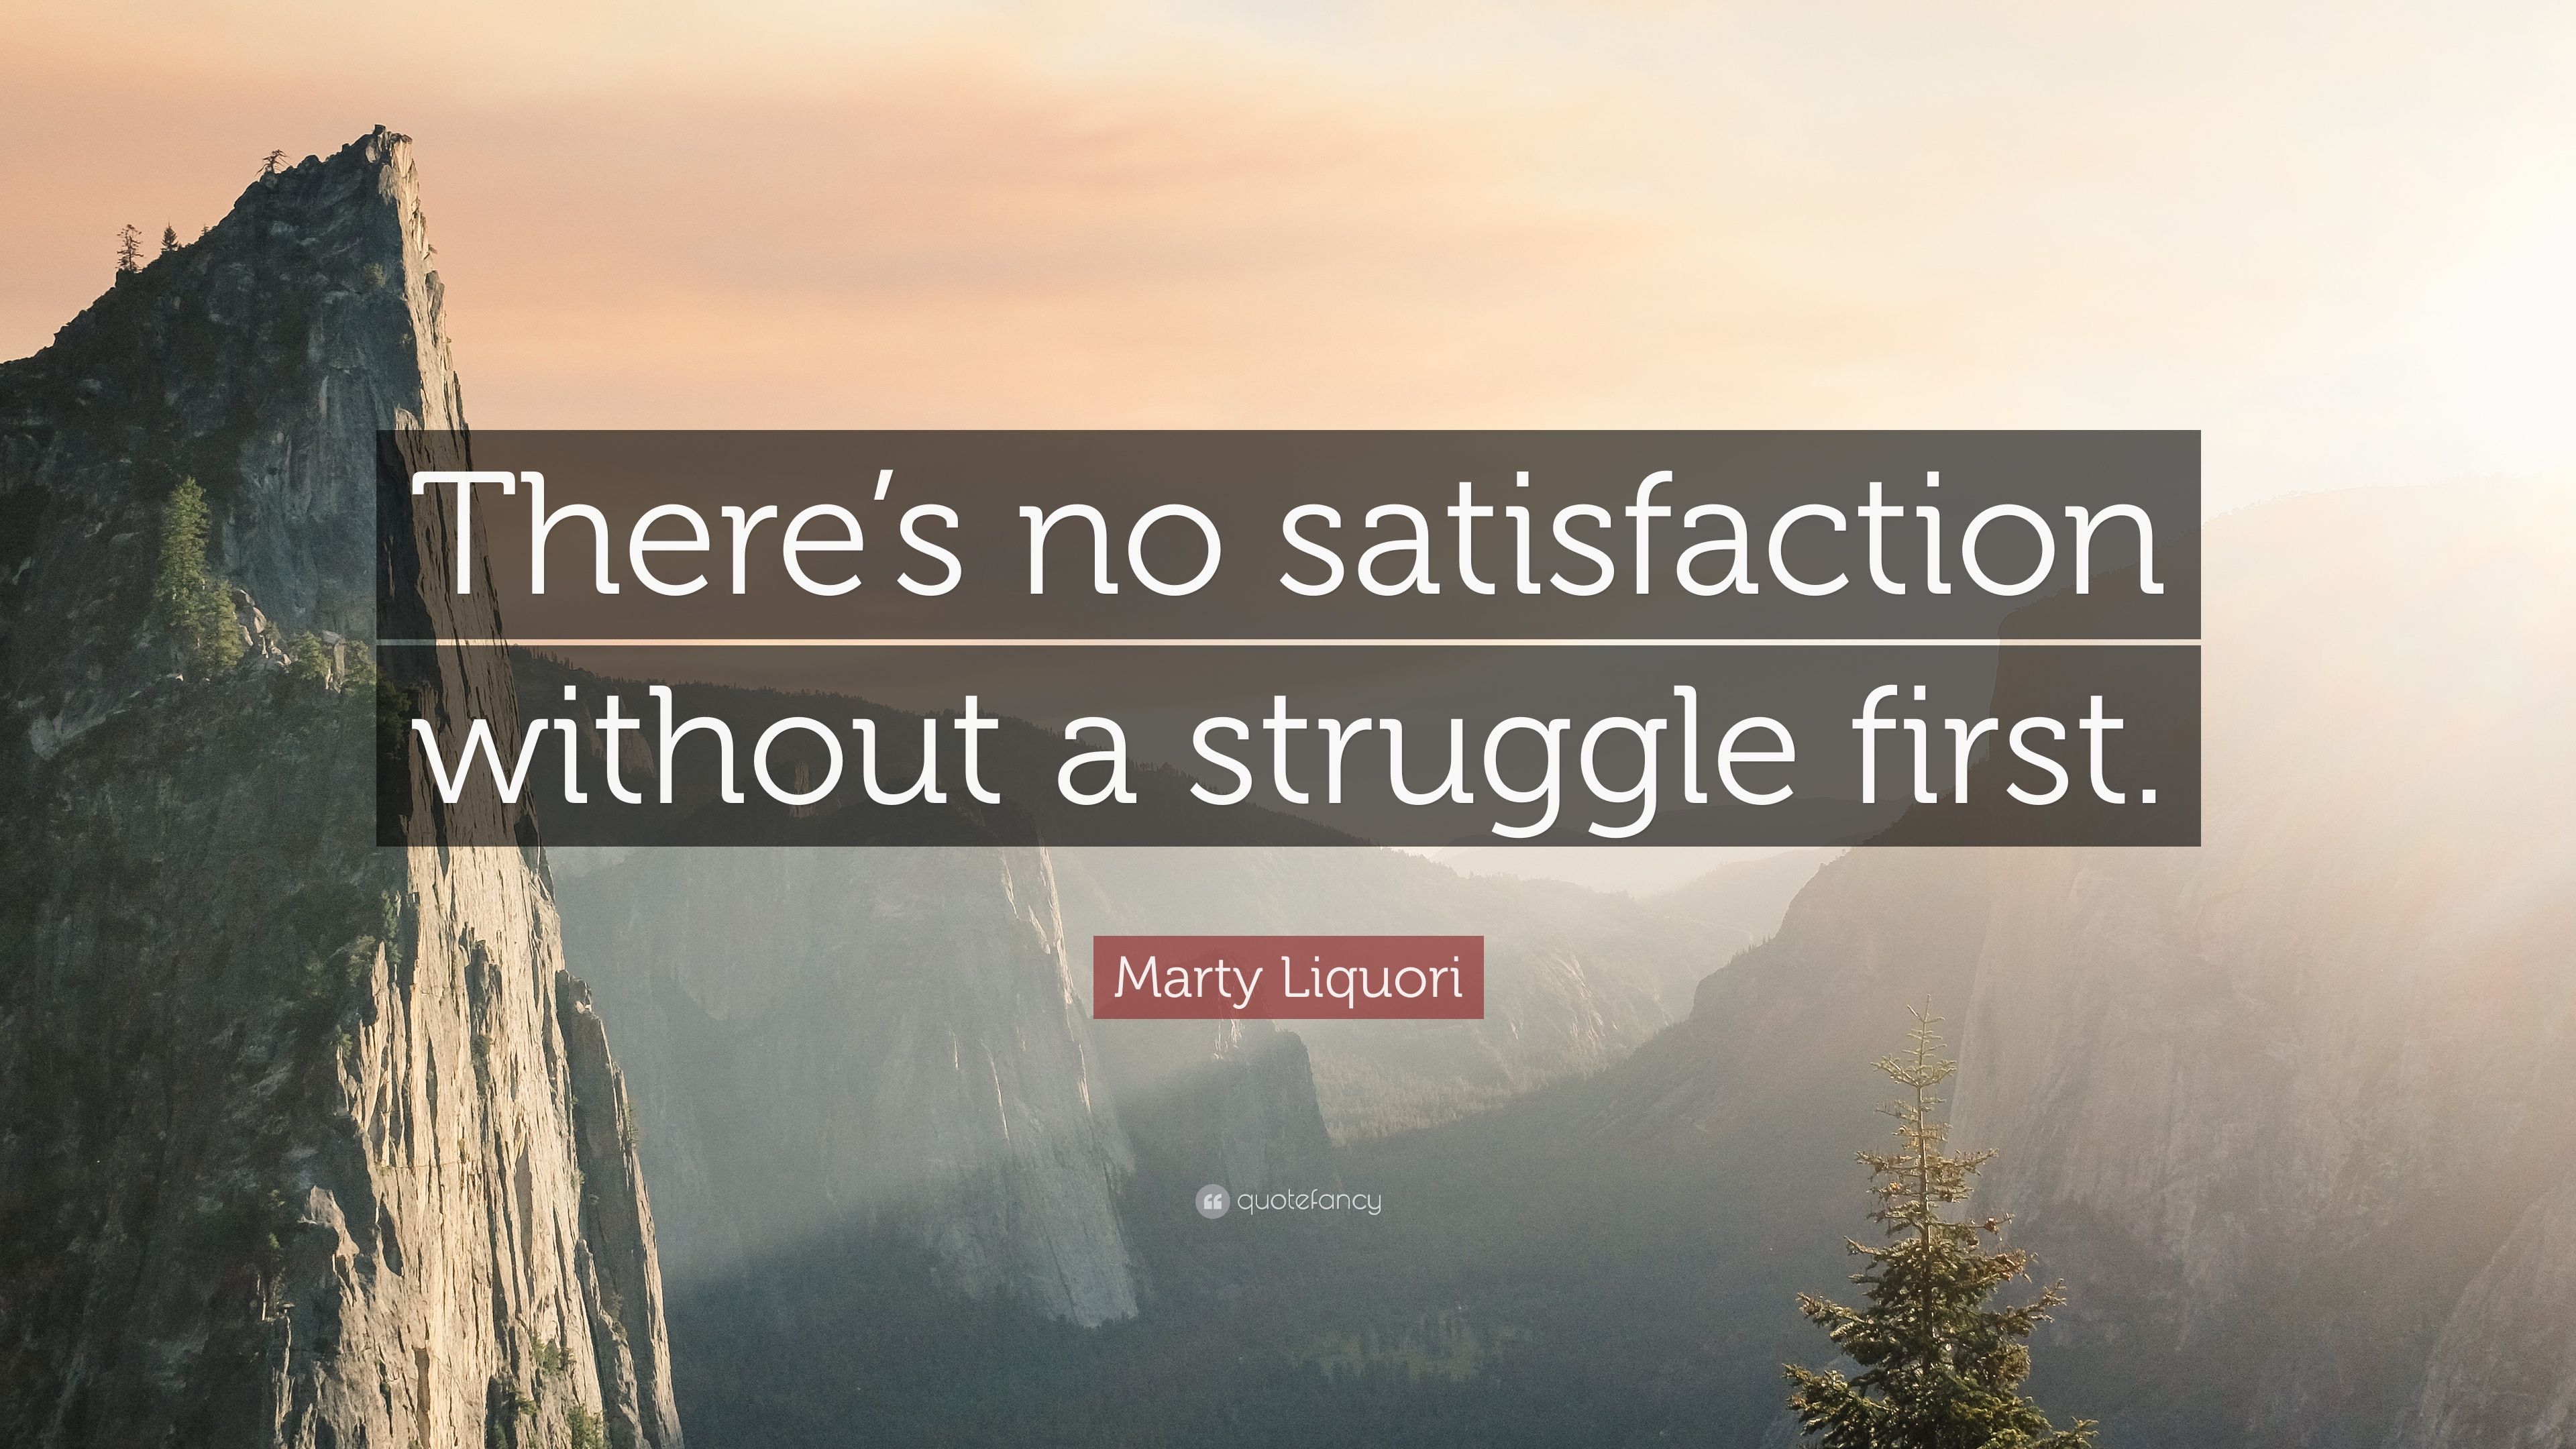 Marty Liquori Quote: “There's no satisfaction without a struggle first.” (7 wallpaper)